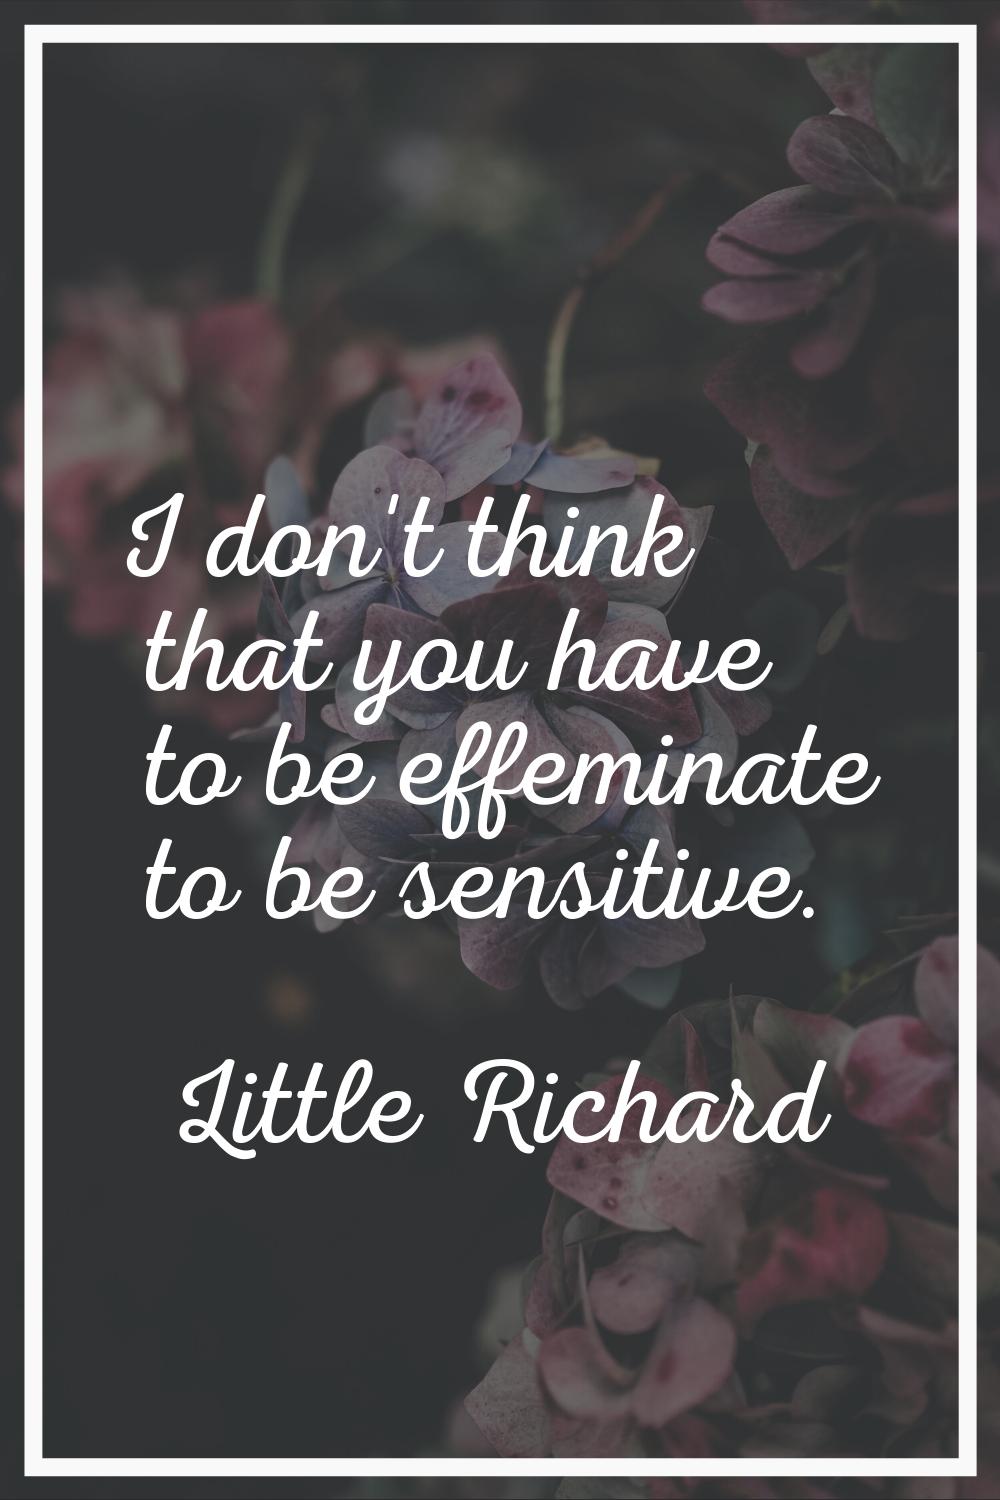 I don't think that you have to be effeminate to be sensitive.